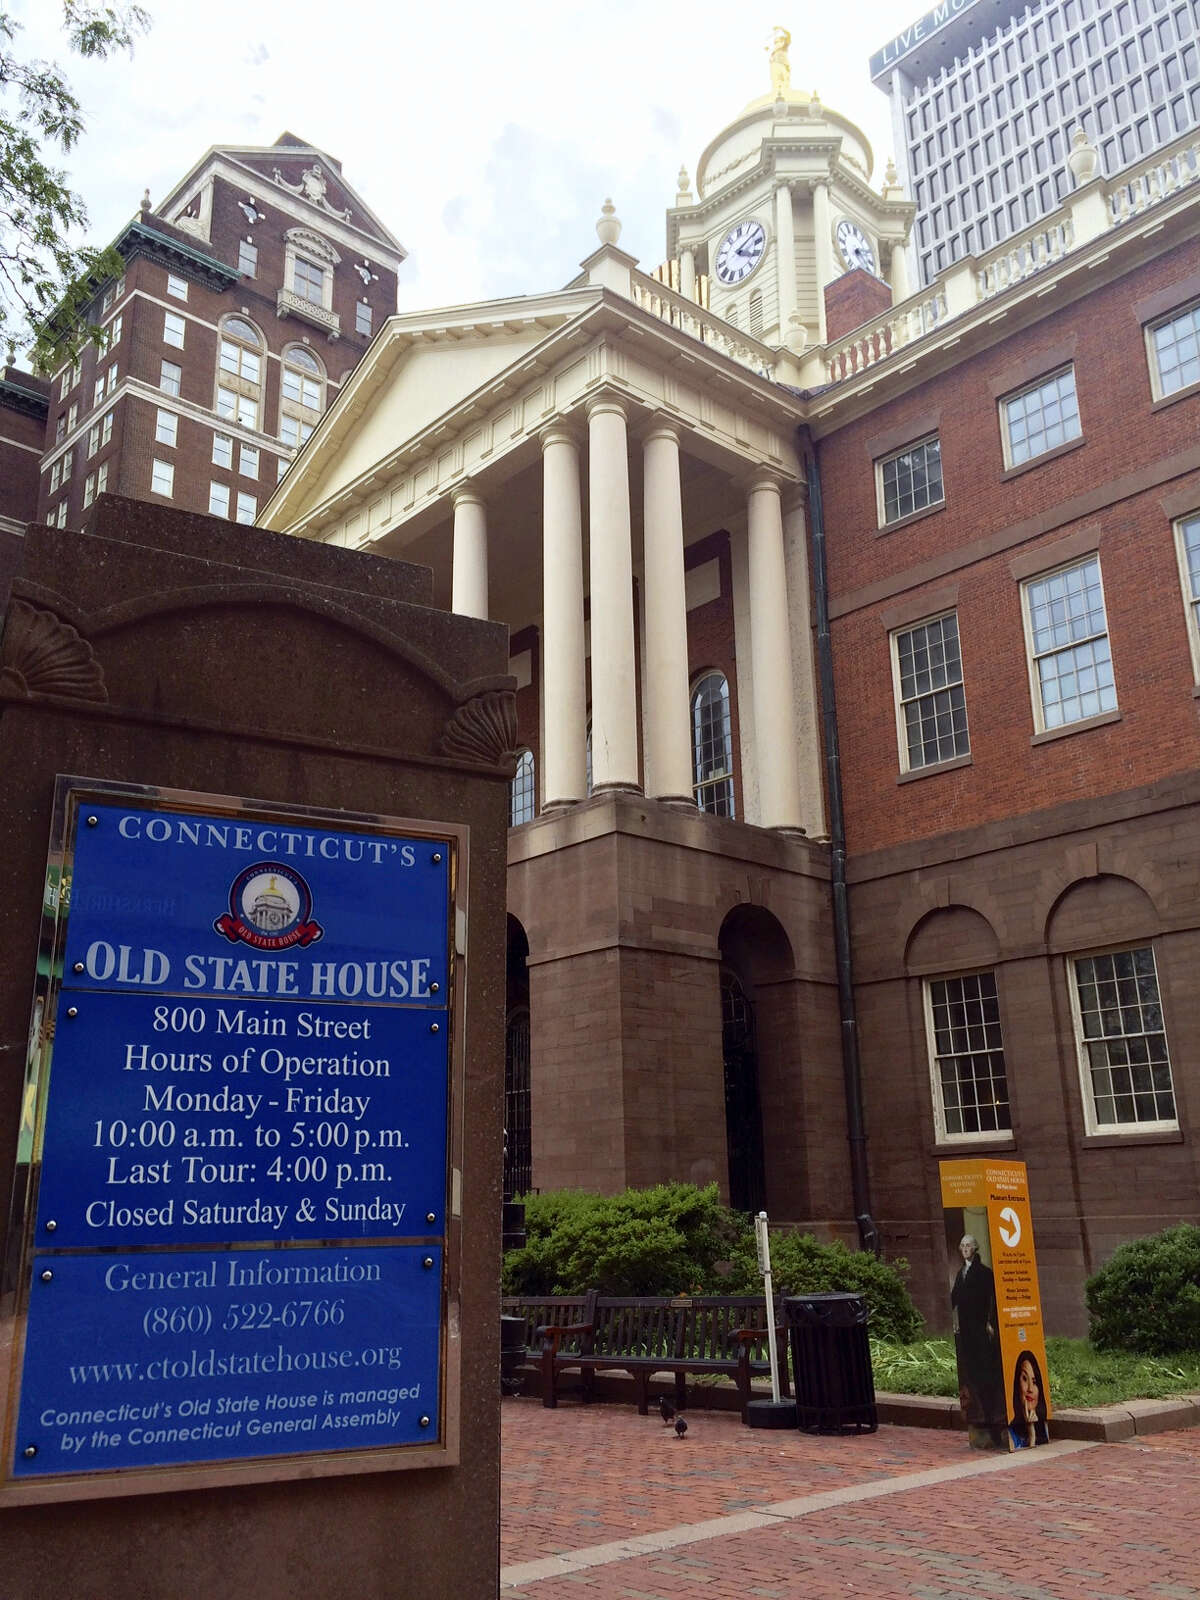 The Old State House stands on Main Street in Hartford. The fate of the 220-year-old historic landmark is uncertain after state lawmakers transferred responsibility for the property to the state’s environmental agency, which is struggling to cover millions of dollars in budget cuts.